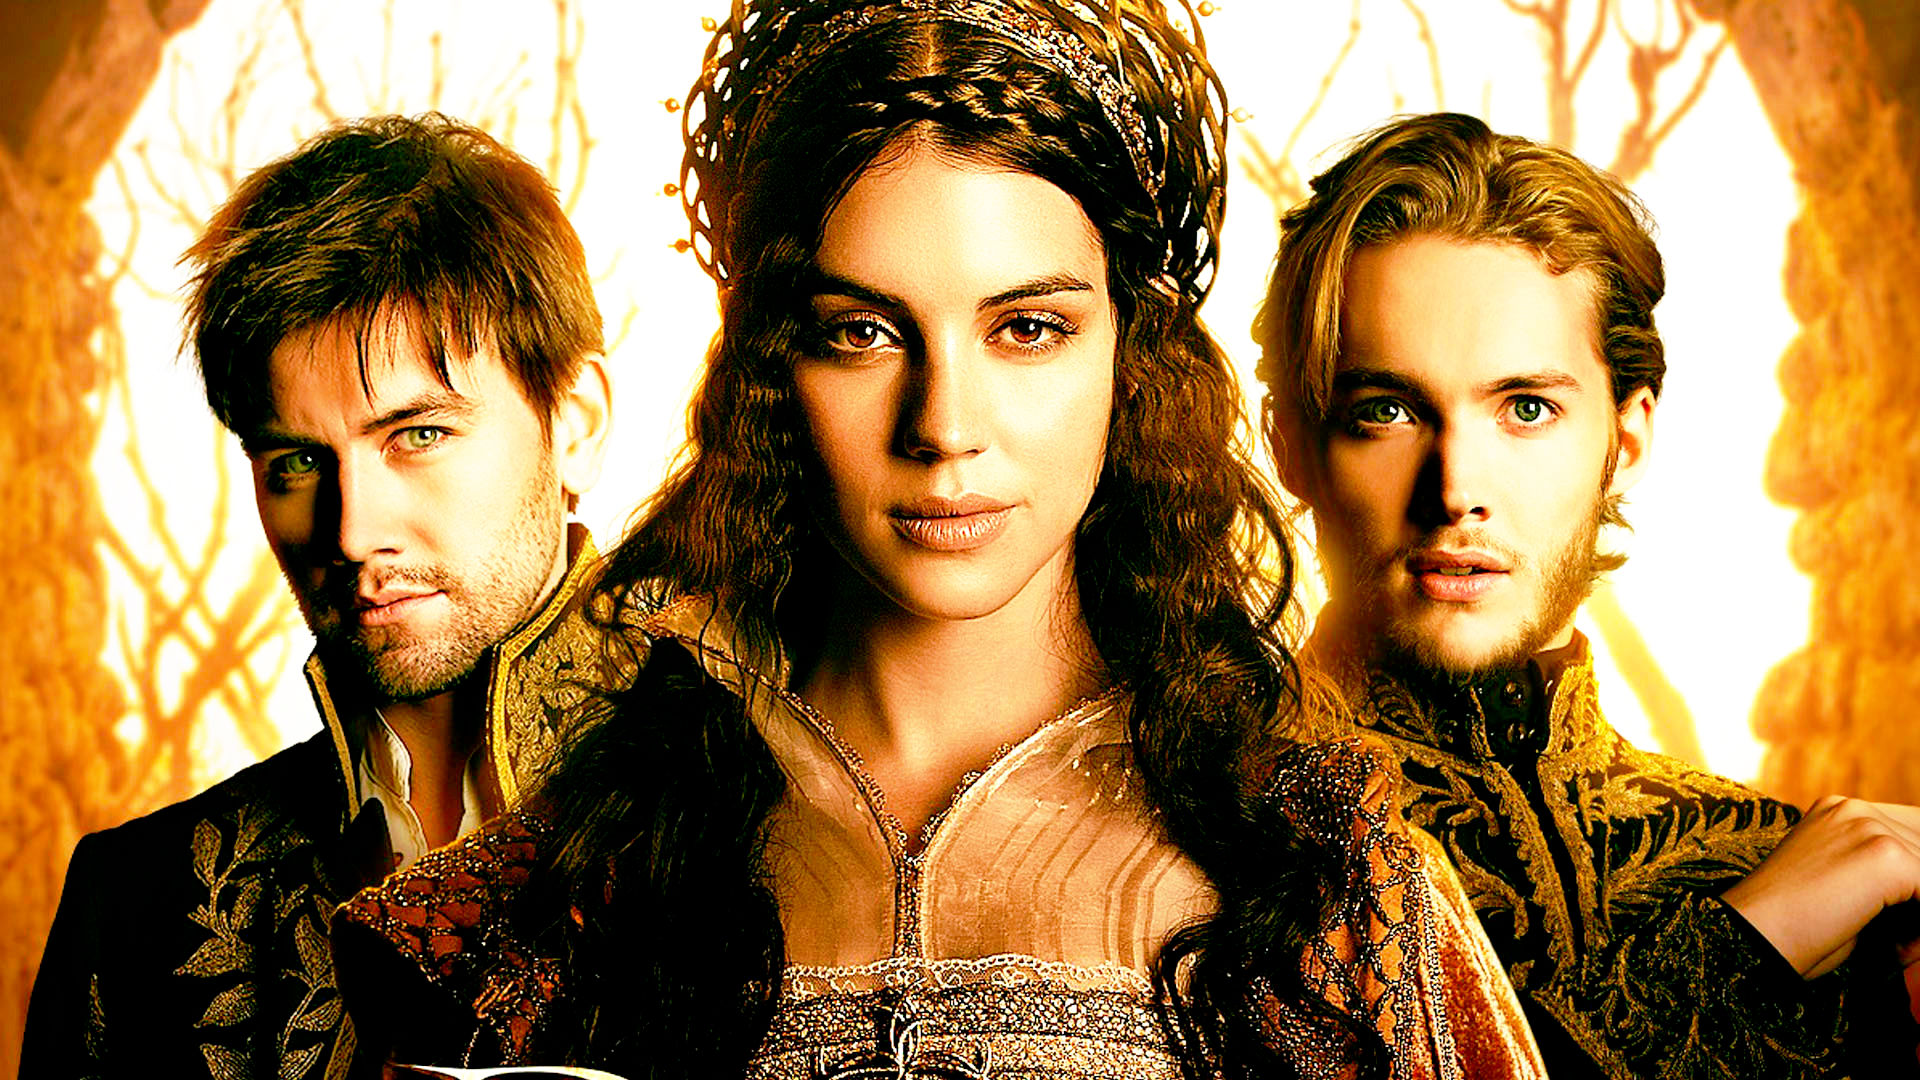 reign wallpaper,hair,hairstyle,movie,photography,long hair